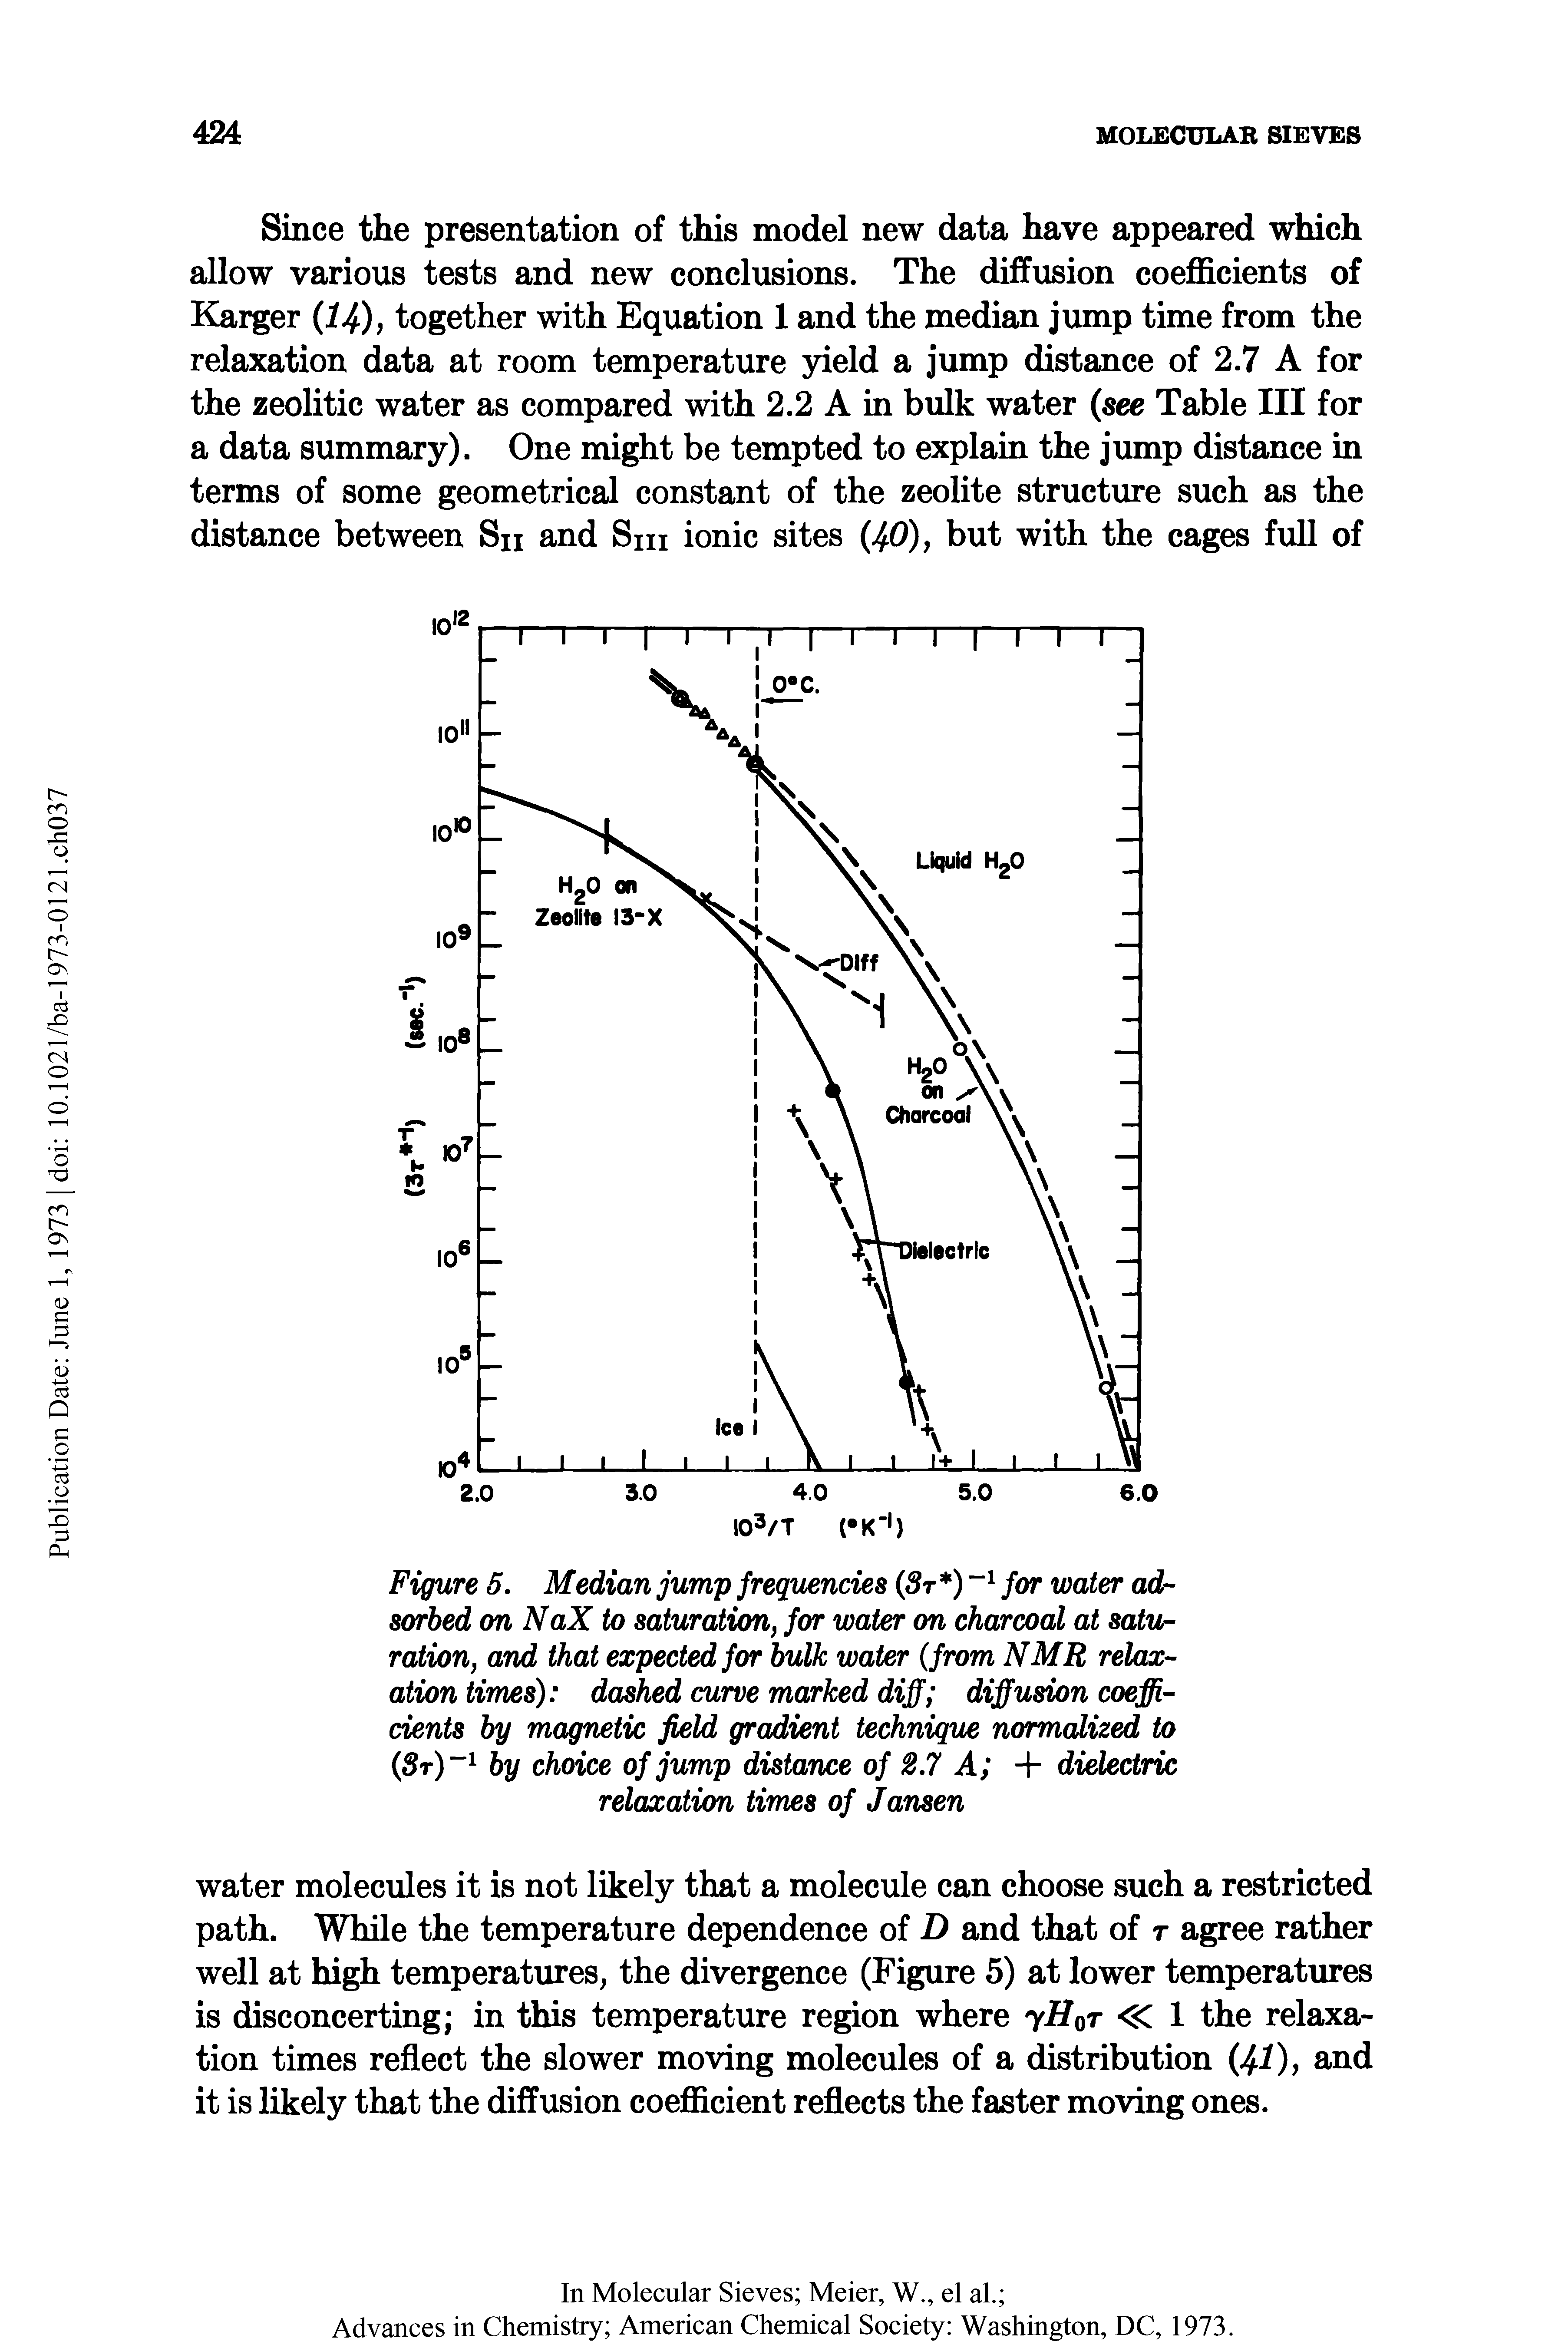 Figure 5. Median jump frequencies (Sr ) 1 for water adsorbed on NaX to saturation, for water on charcoal at saturation, and that expected for bulk water (from NMR relaxation times) dashed curve marked diff diffusion coefficients by magnetic field gradient technique normalized to (Sr) 1 by choice of jump distance of 2.7 A + dielectric relaxation times of Jansen...